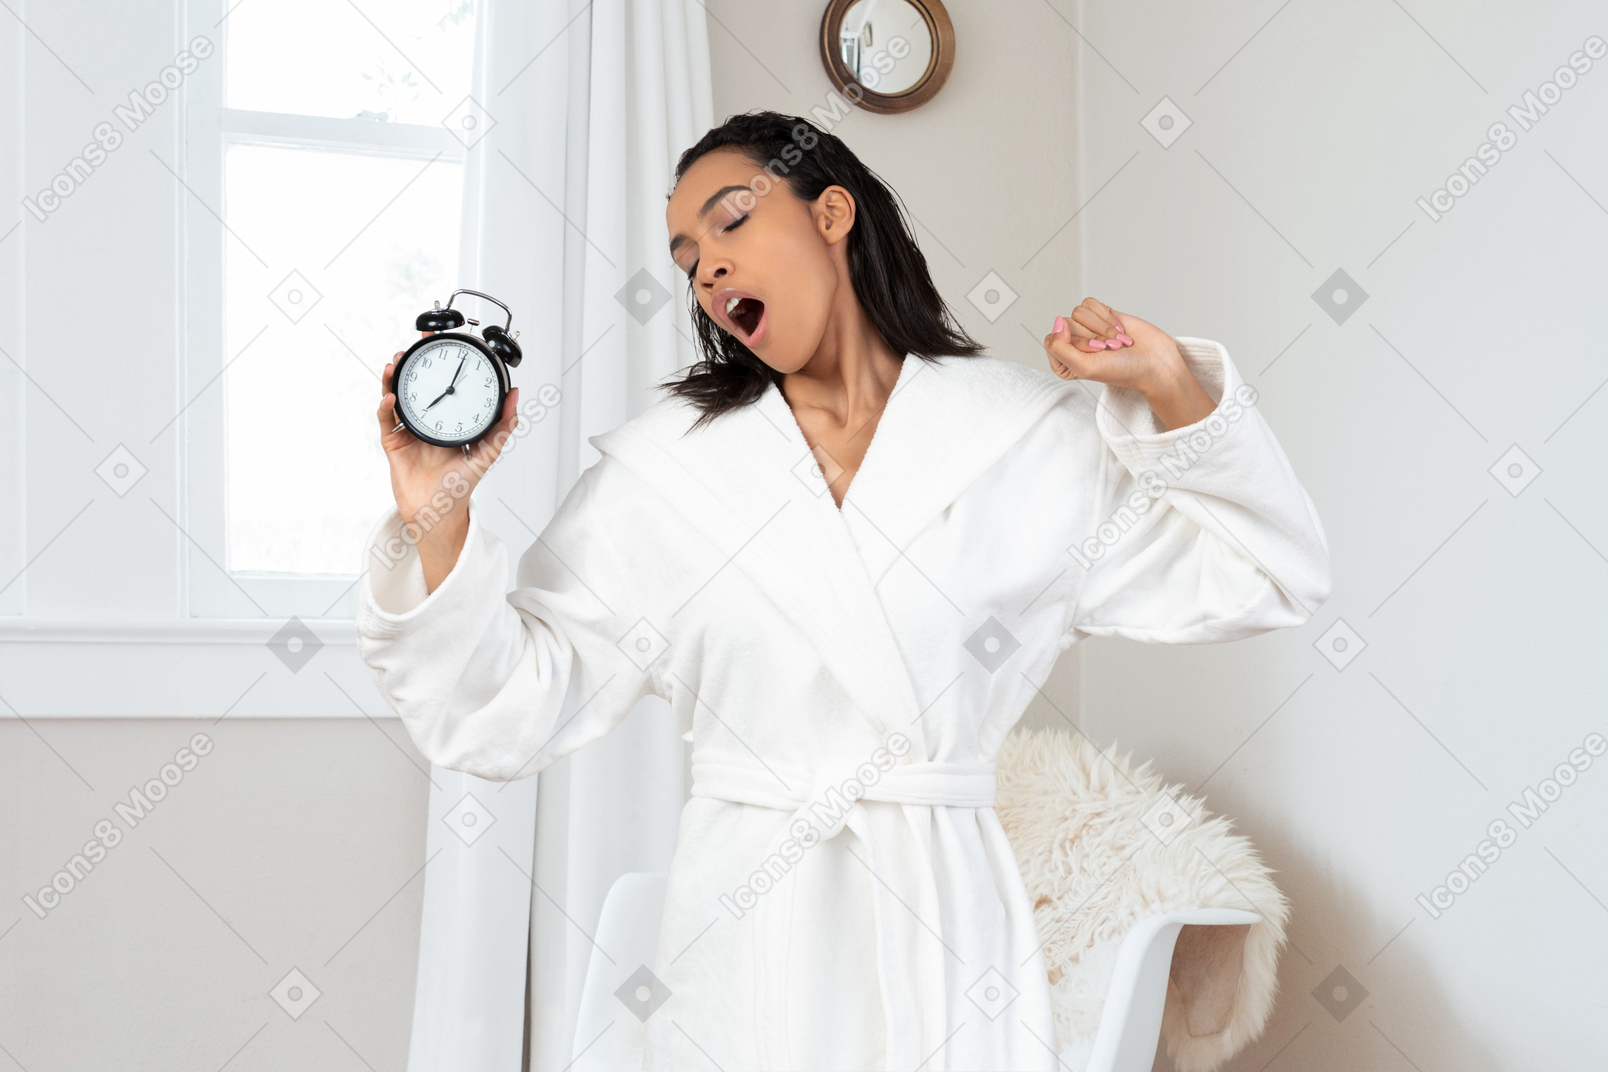 A woman in a robe holding an alarm clock